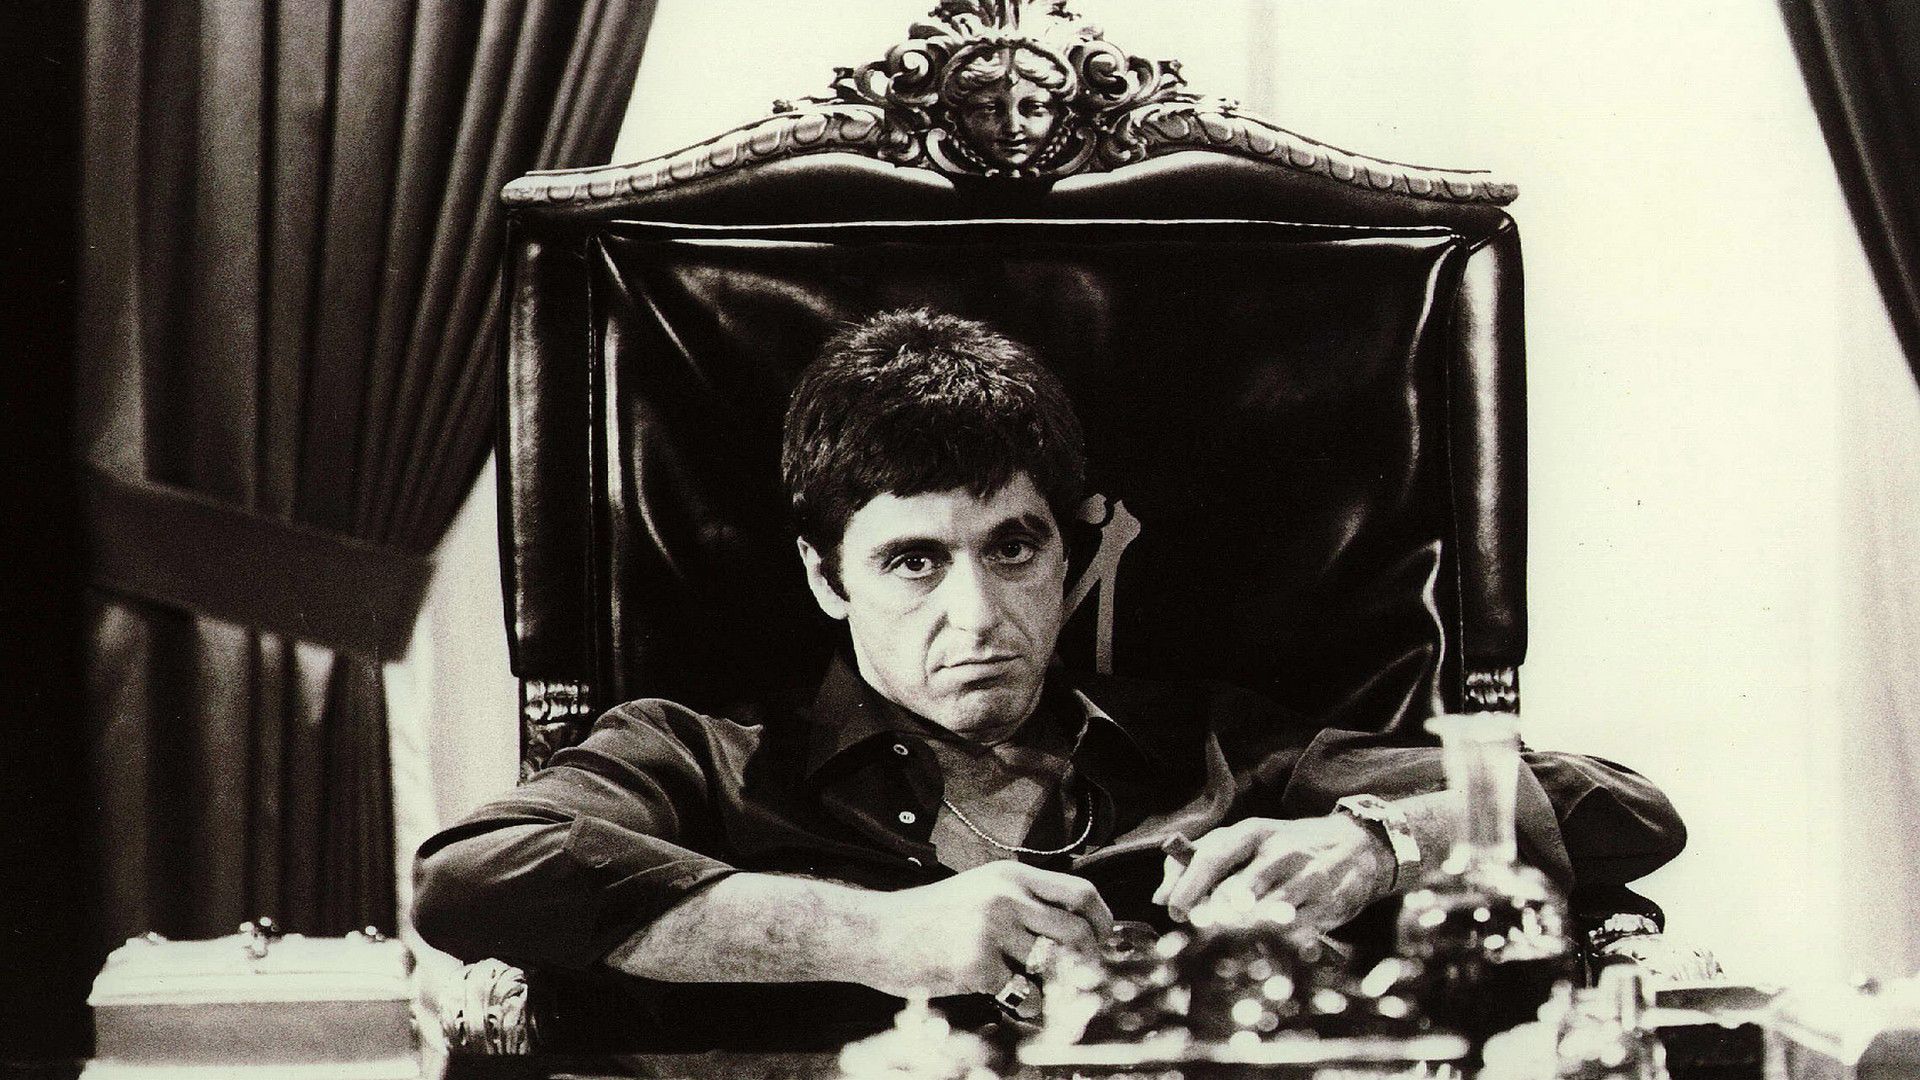 scarface pc digital download